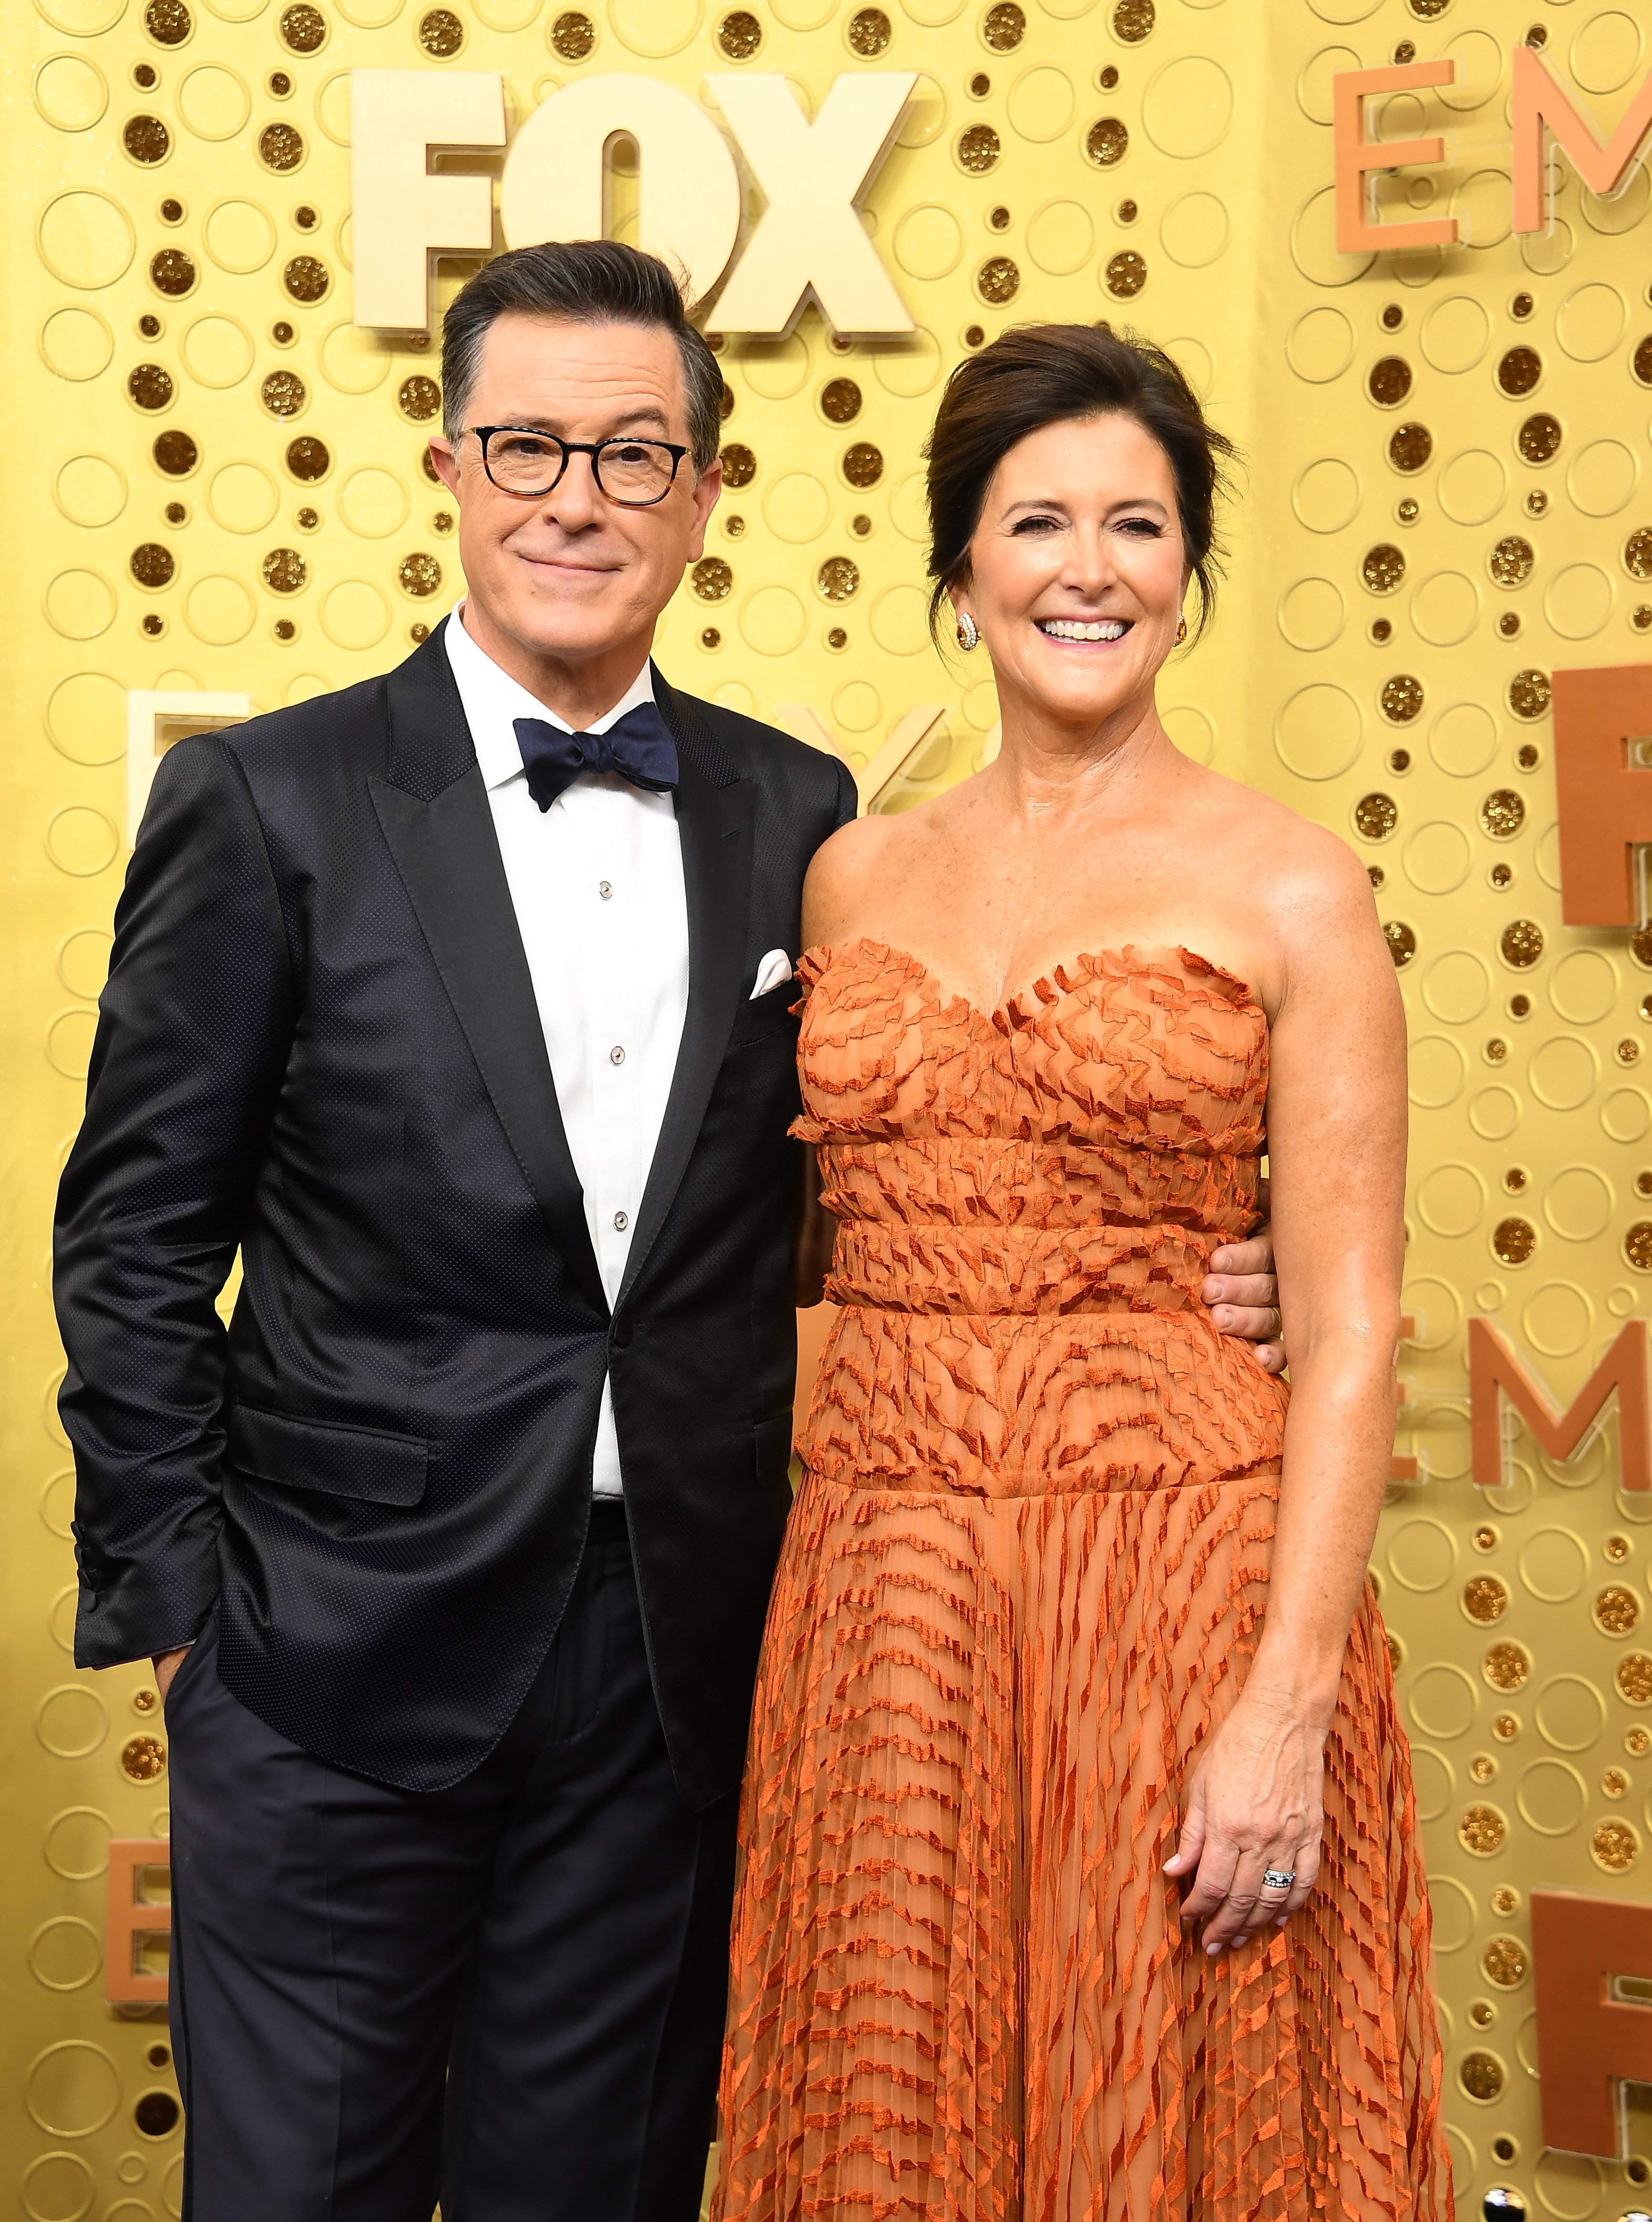 Stephen Colbert and Evelyn McGee-Colbert at the 71st Emmy Awards on September 22, 2019 | Source: Getty Images